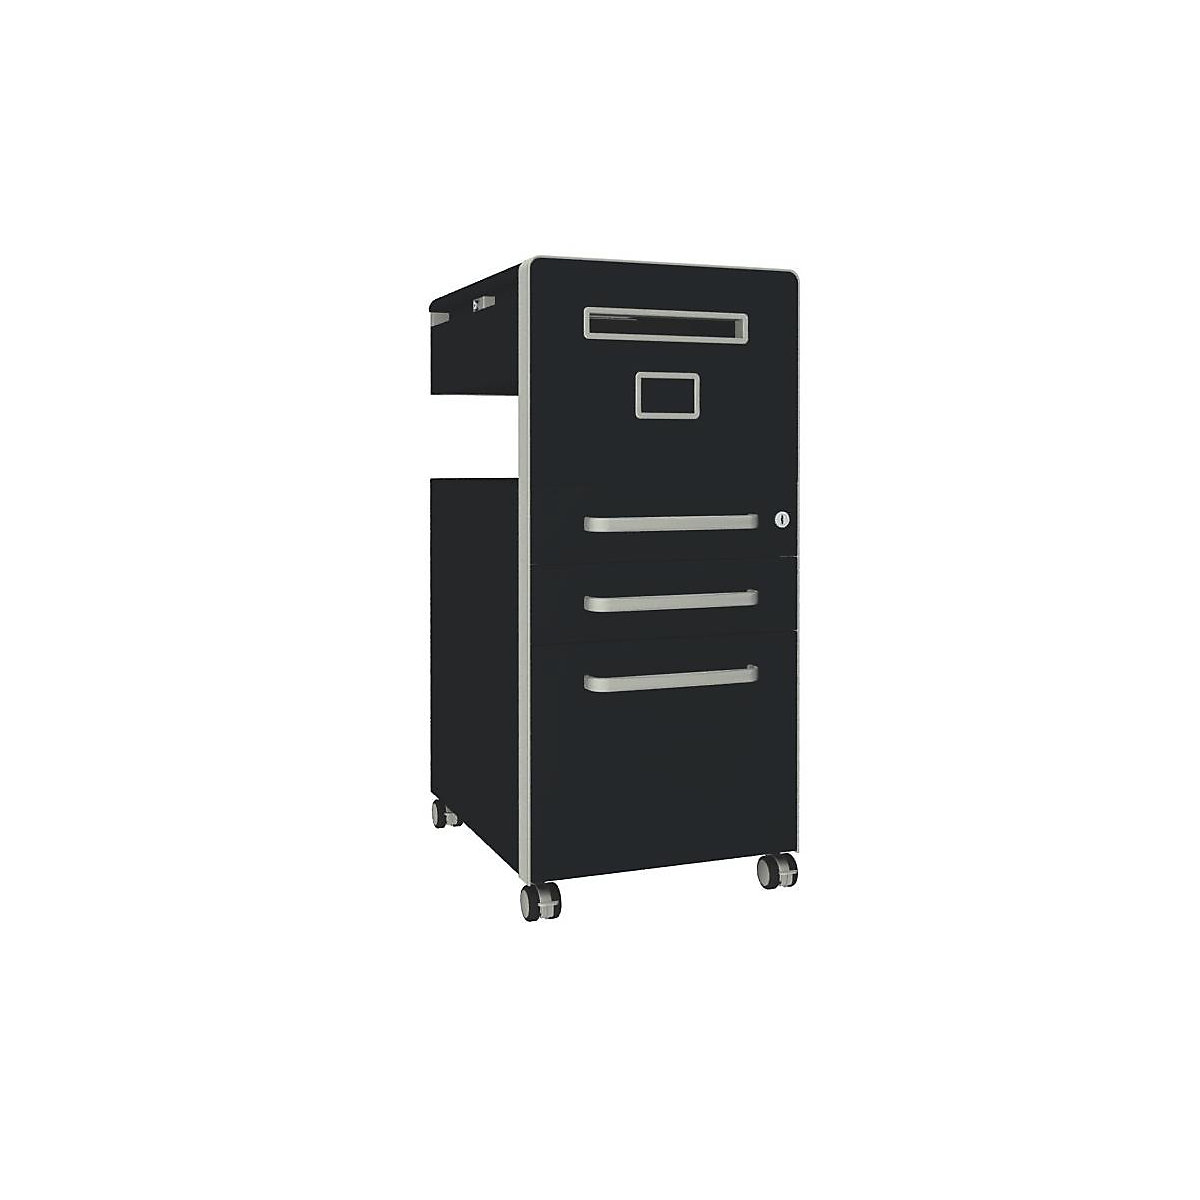 Bite™ pedestal furniture, with 1 whiteboard, opens on the right side – BISLEY, with 2 universal drawers, 1 suspension file drawer, prussian-32